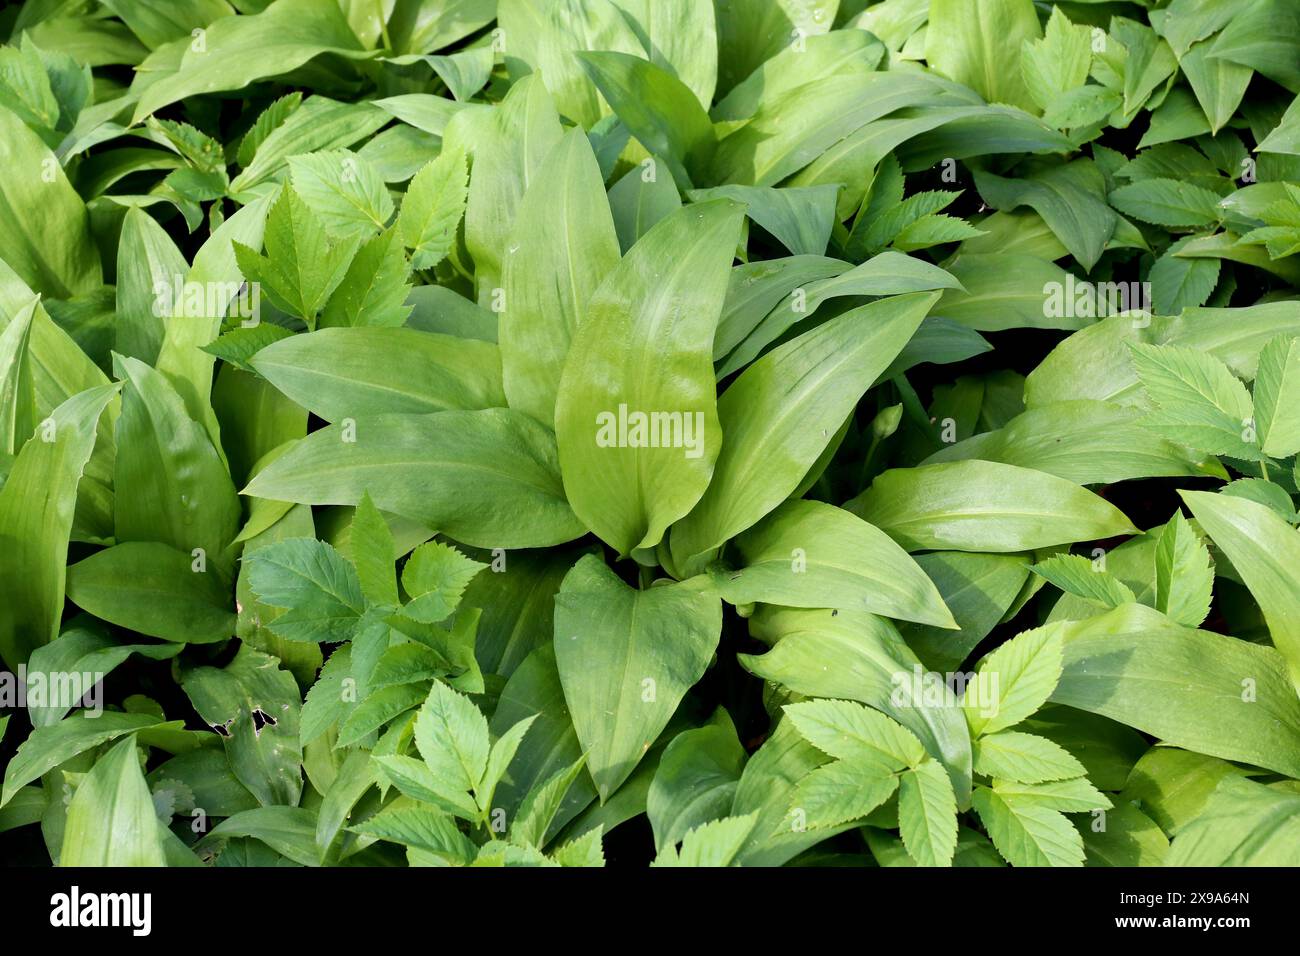 Allium ursinum, known as wild garlic, has been credited with many medicinal qualities and is a popular homeopathic ingredient. Stock Photo